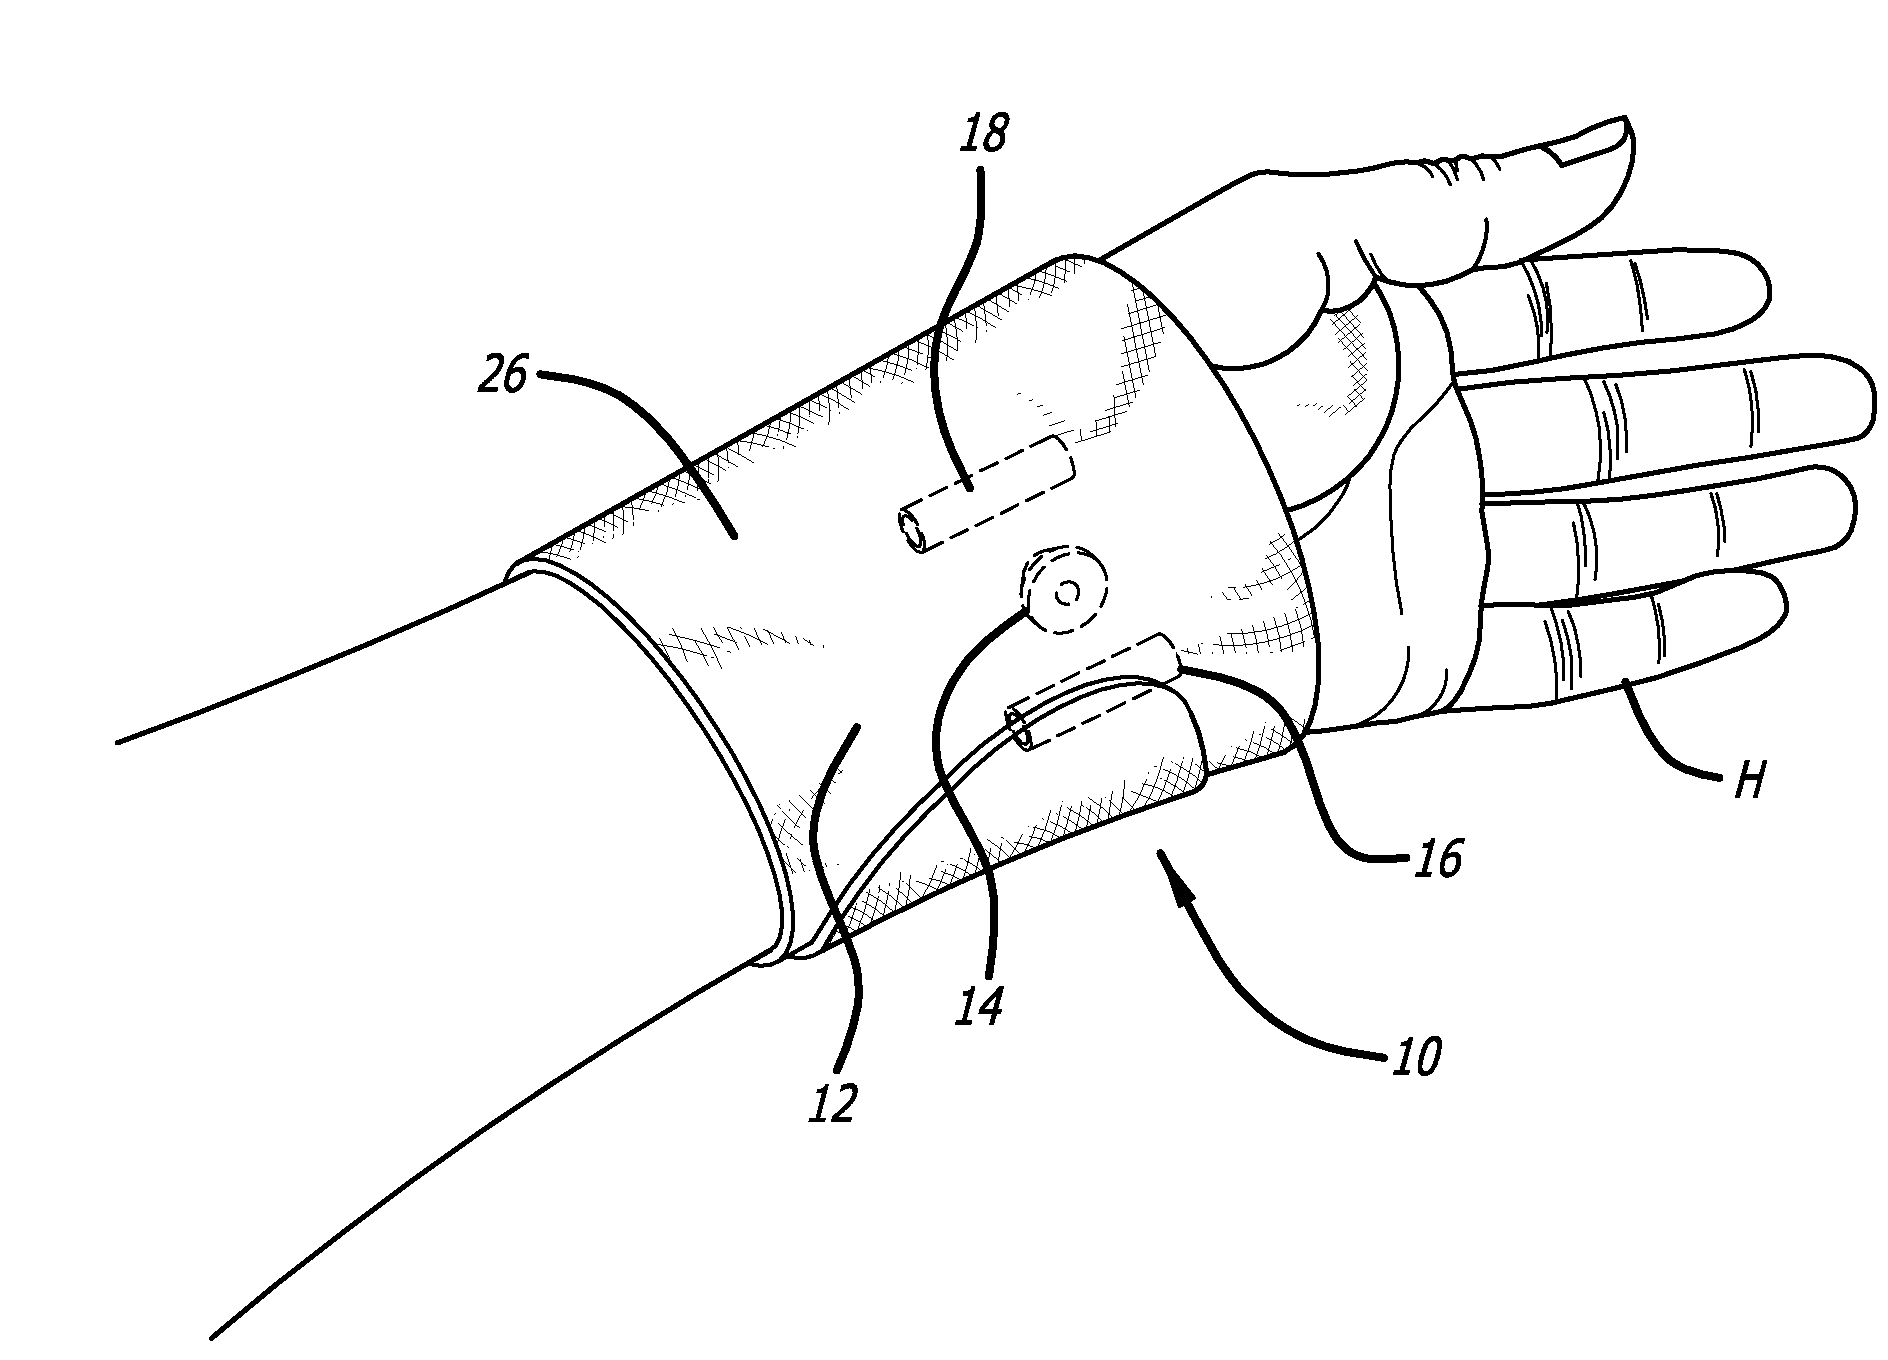 Wrist brace and method for alleviating and preventing wrist pain